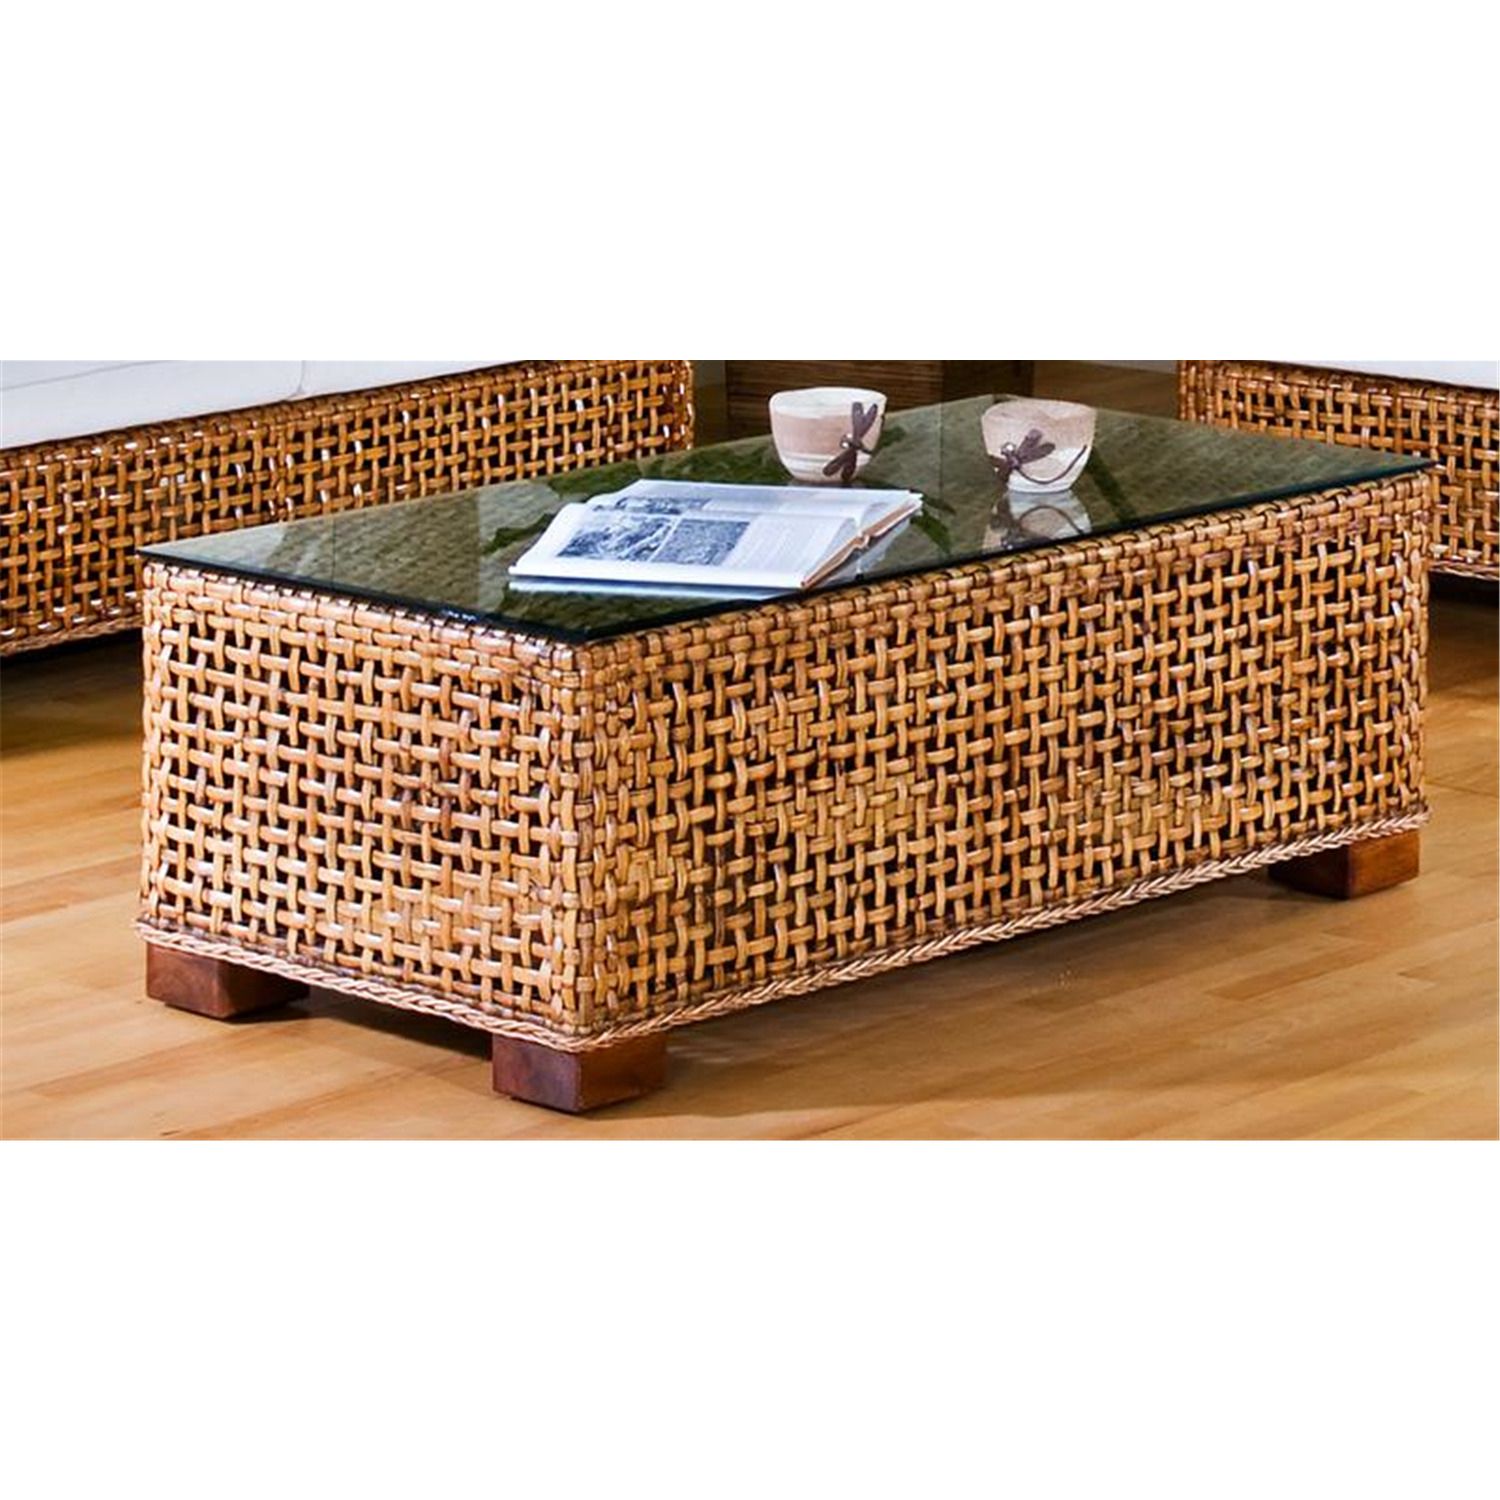 Hospitality Rattan Rattan & Wicker Coffee Table With Glass Intended For Wicker Coffee Tables (View 9 of 15)